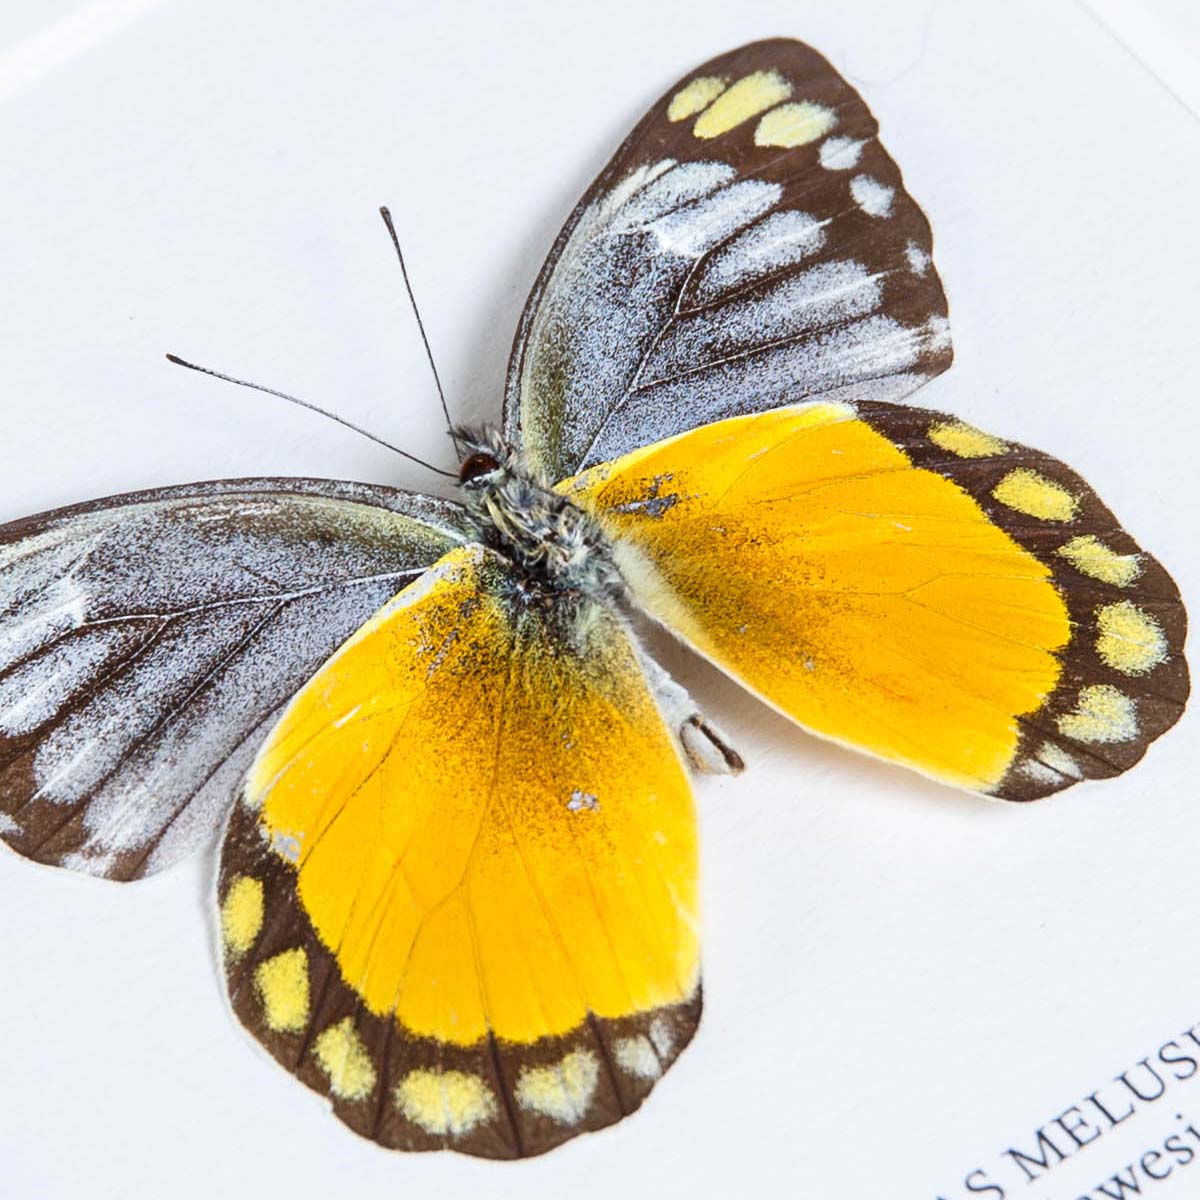 Delias melusina Butterfly In Box Frame From Sulawesi